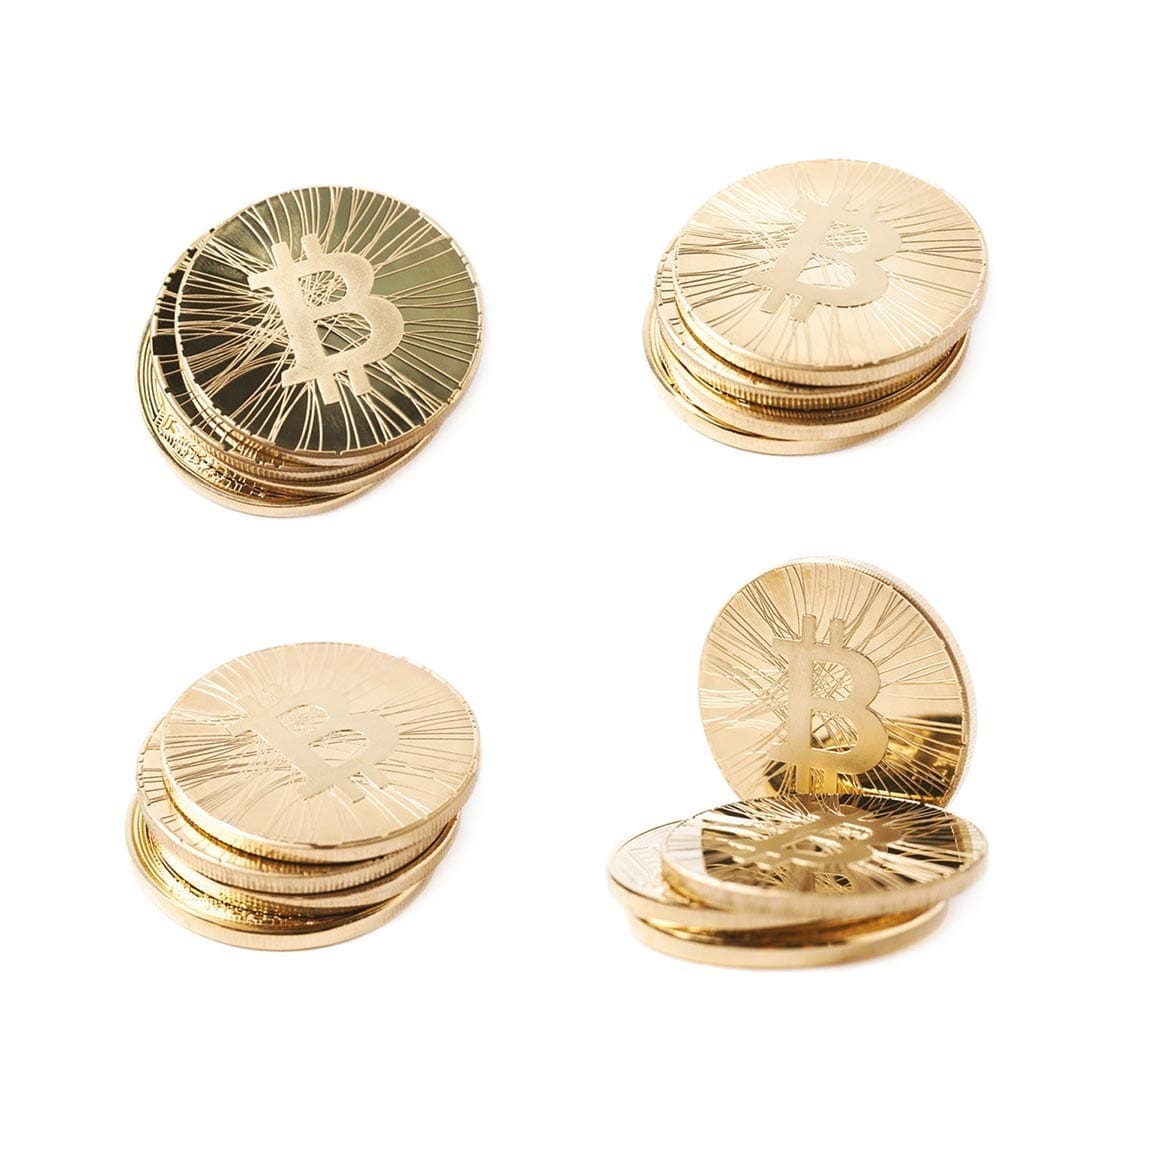 Blanking Coins